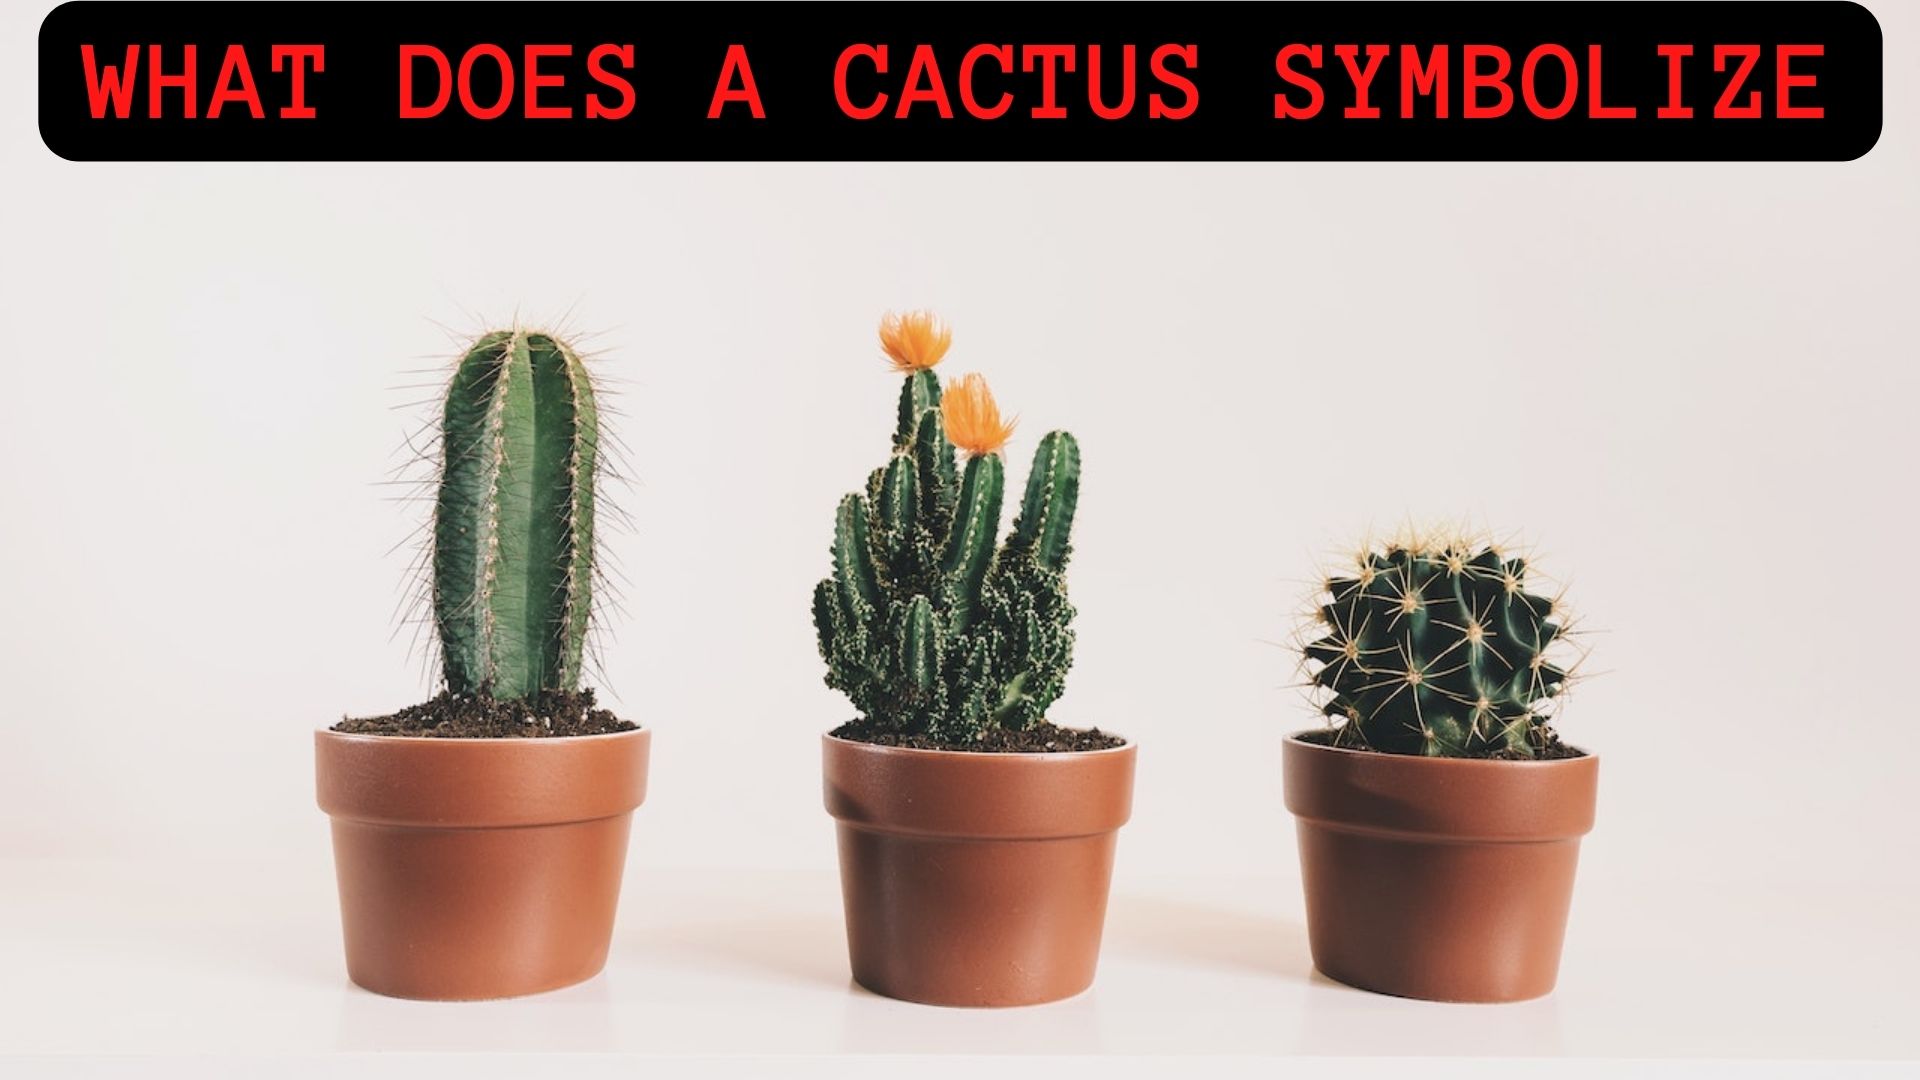 What Does A Cactus Symbolize?